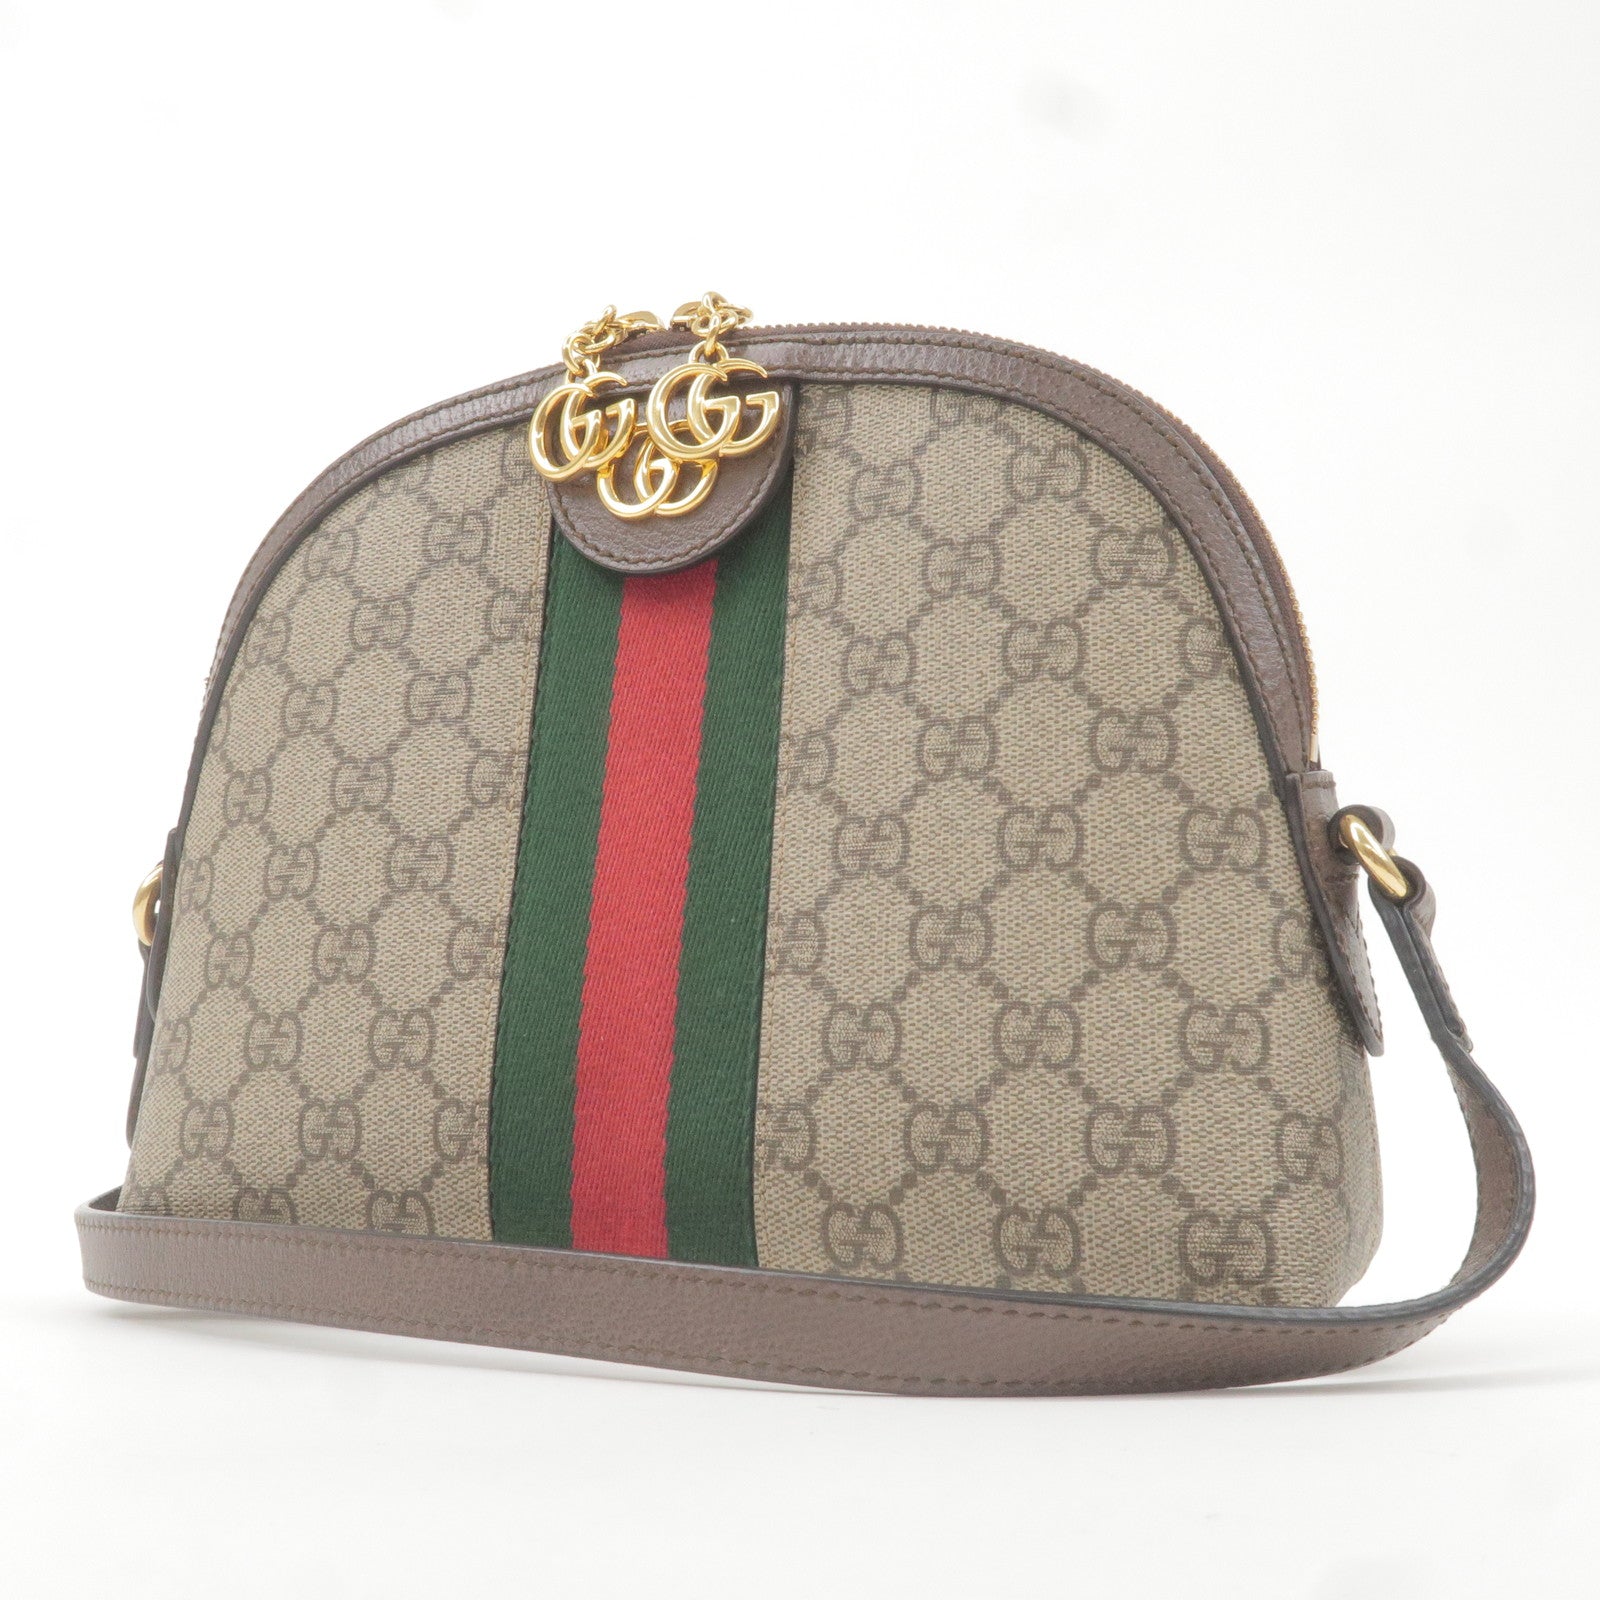 Gucci Beige Small Ophidia GG Shoulder Bag